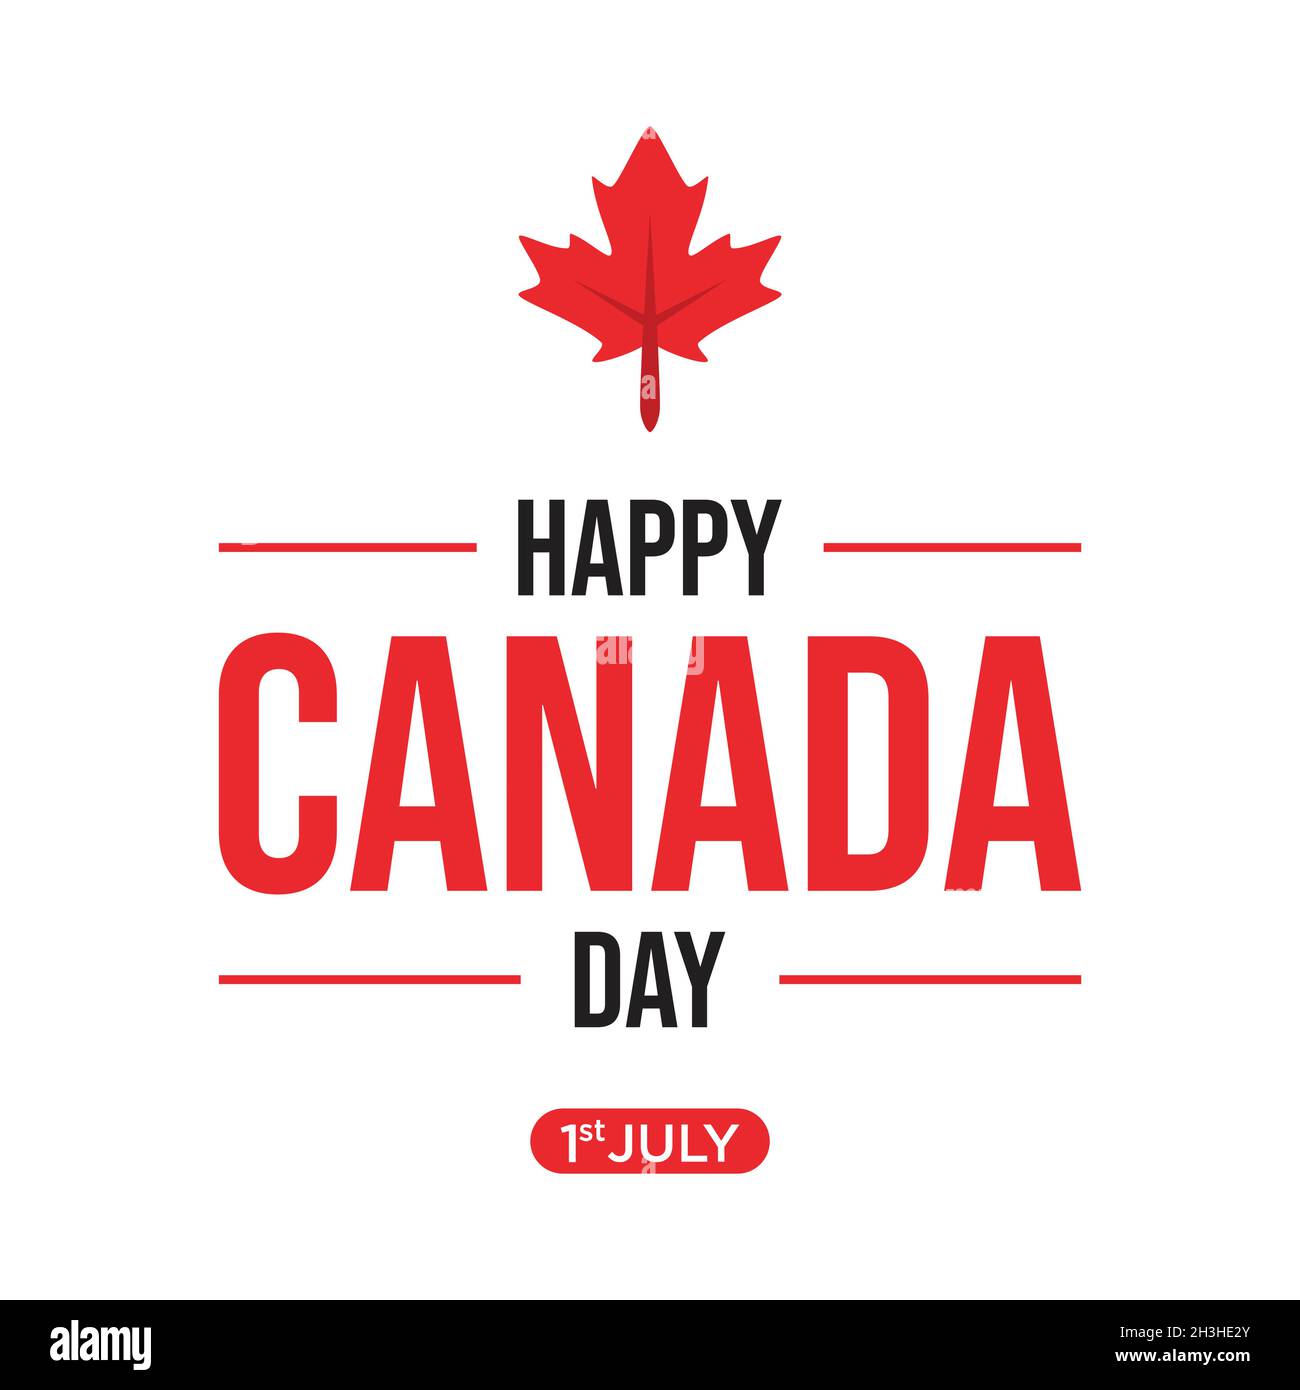 Happy Canada day emblem design with red maple leaf vector image. Vector illustration EPS.8 EPS.10 Stock Vector